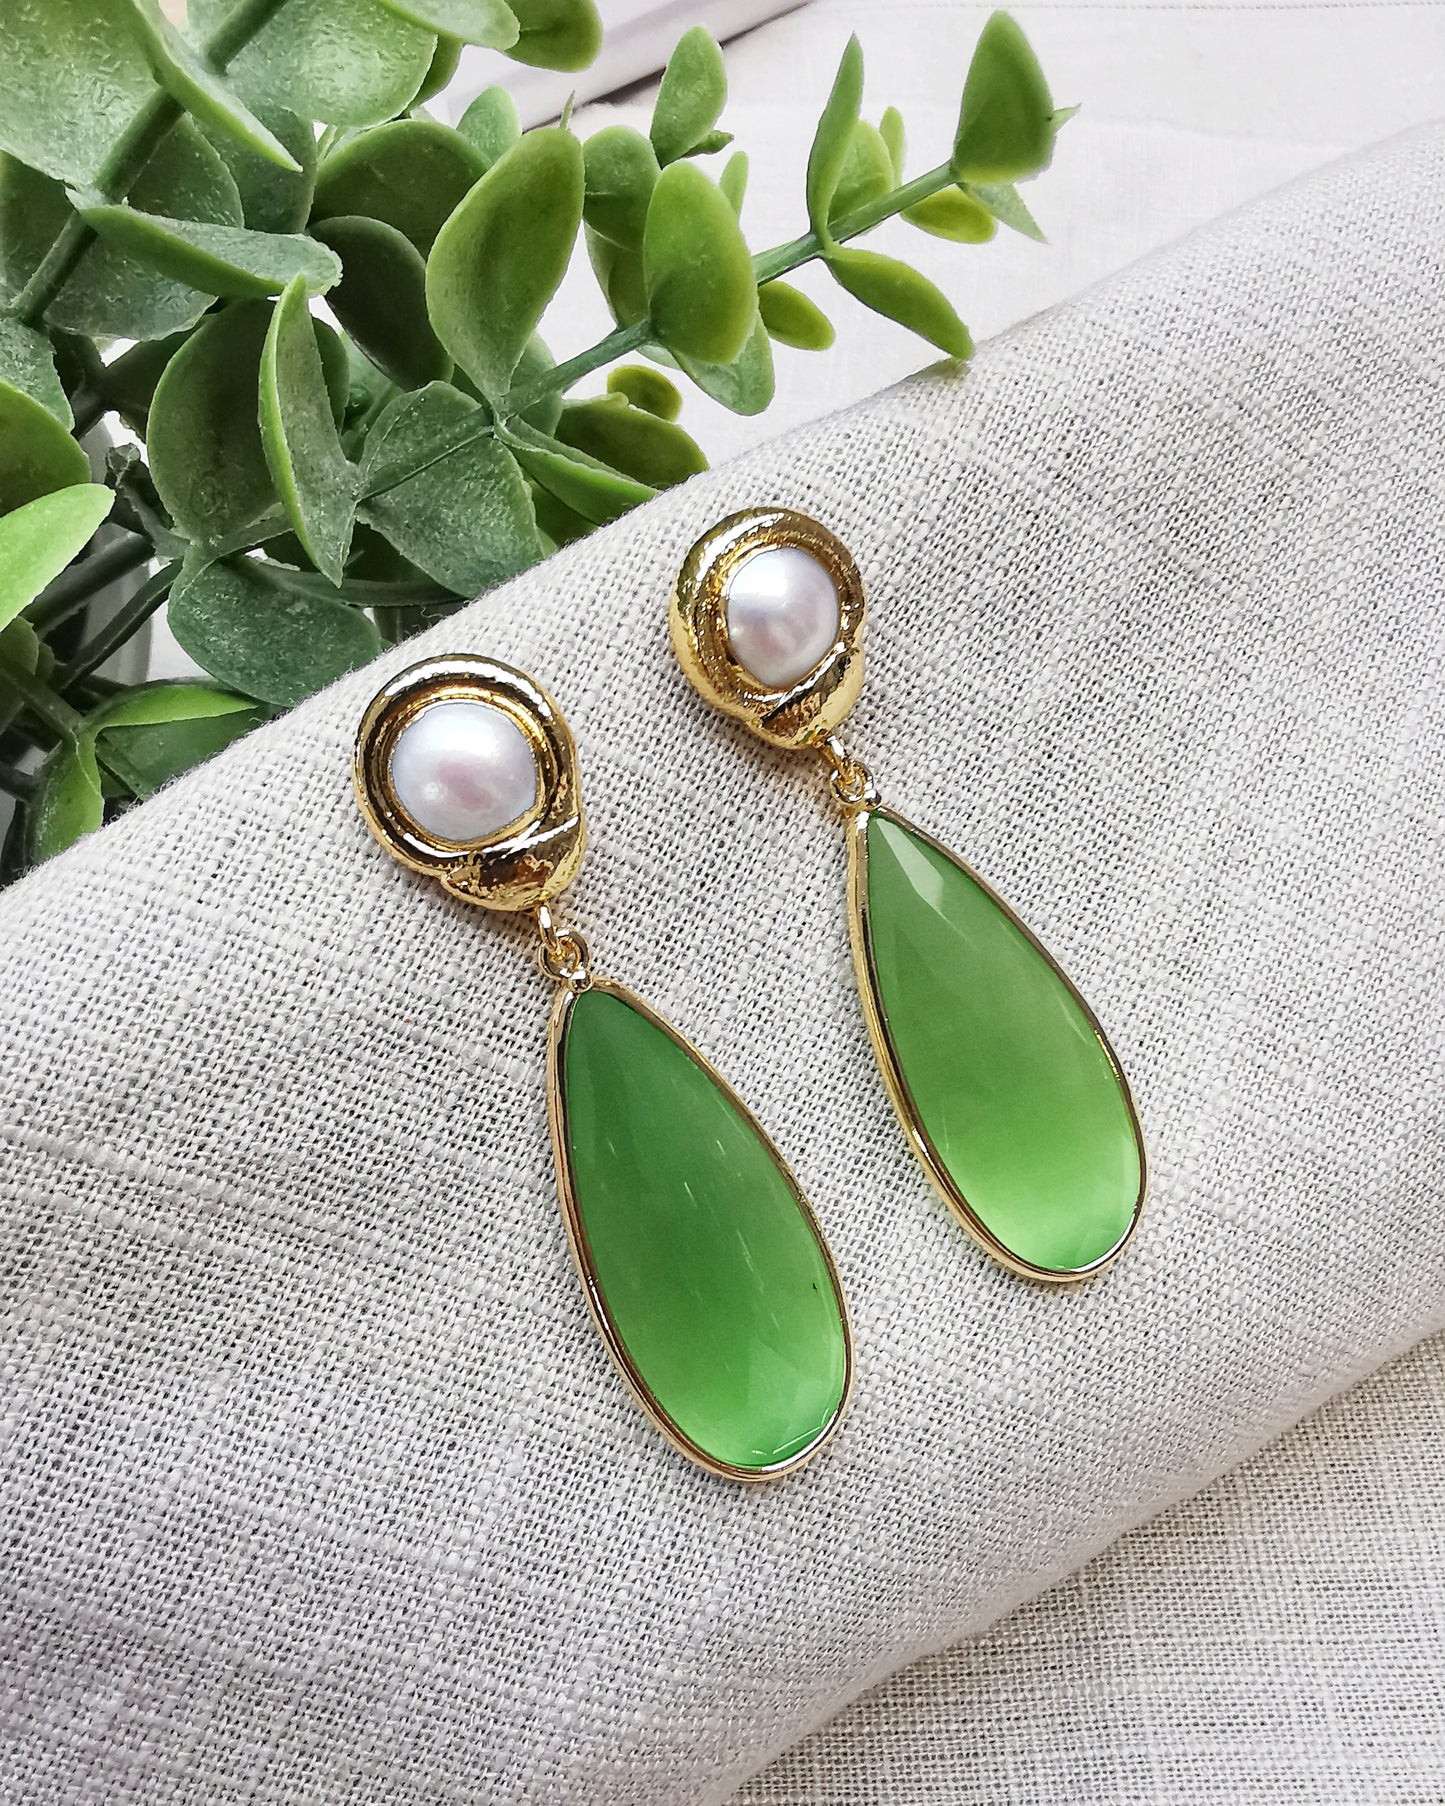 Apple Green Monalisa Statement Earrings with Freshwater Pearls - LIMITED EDITION